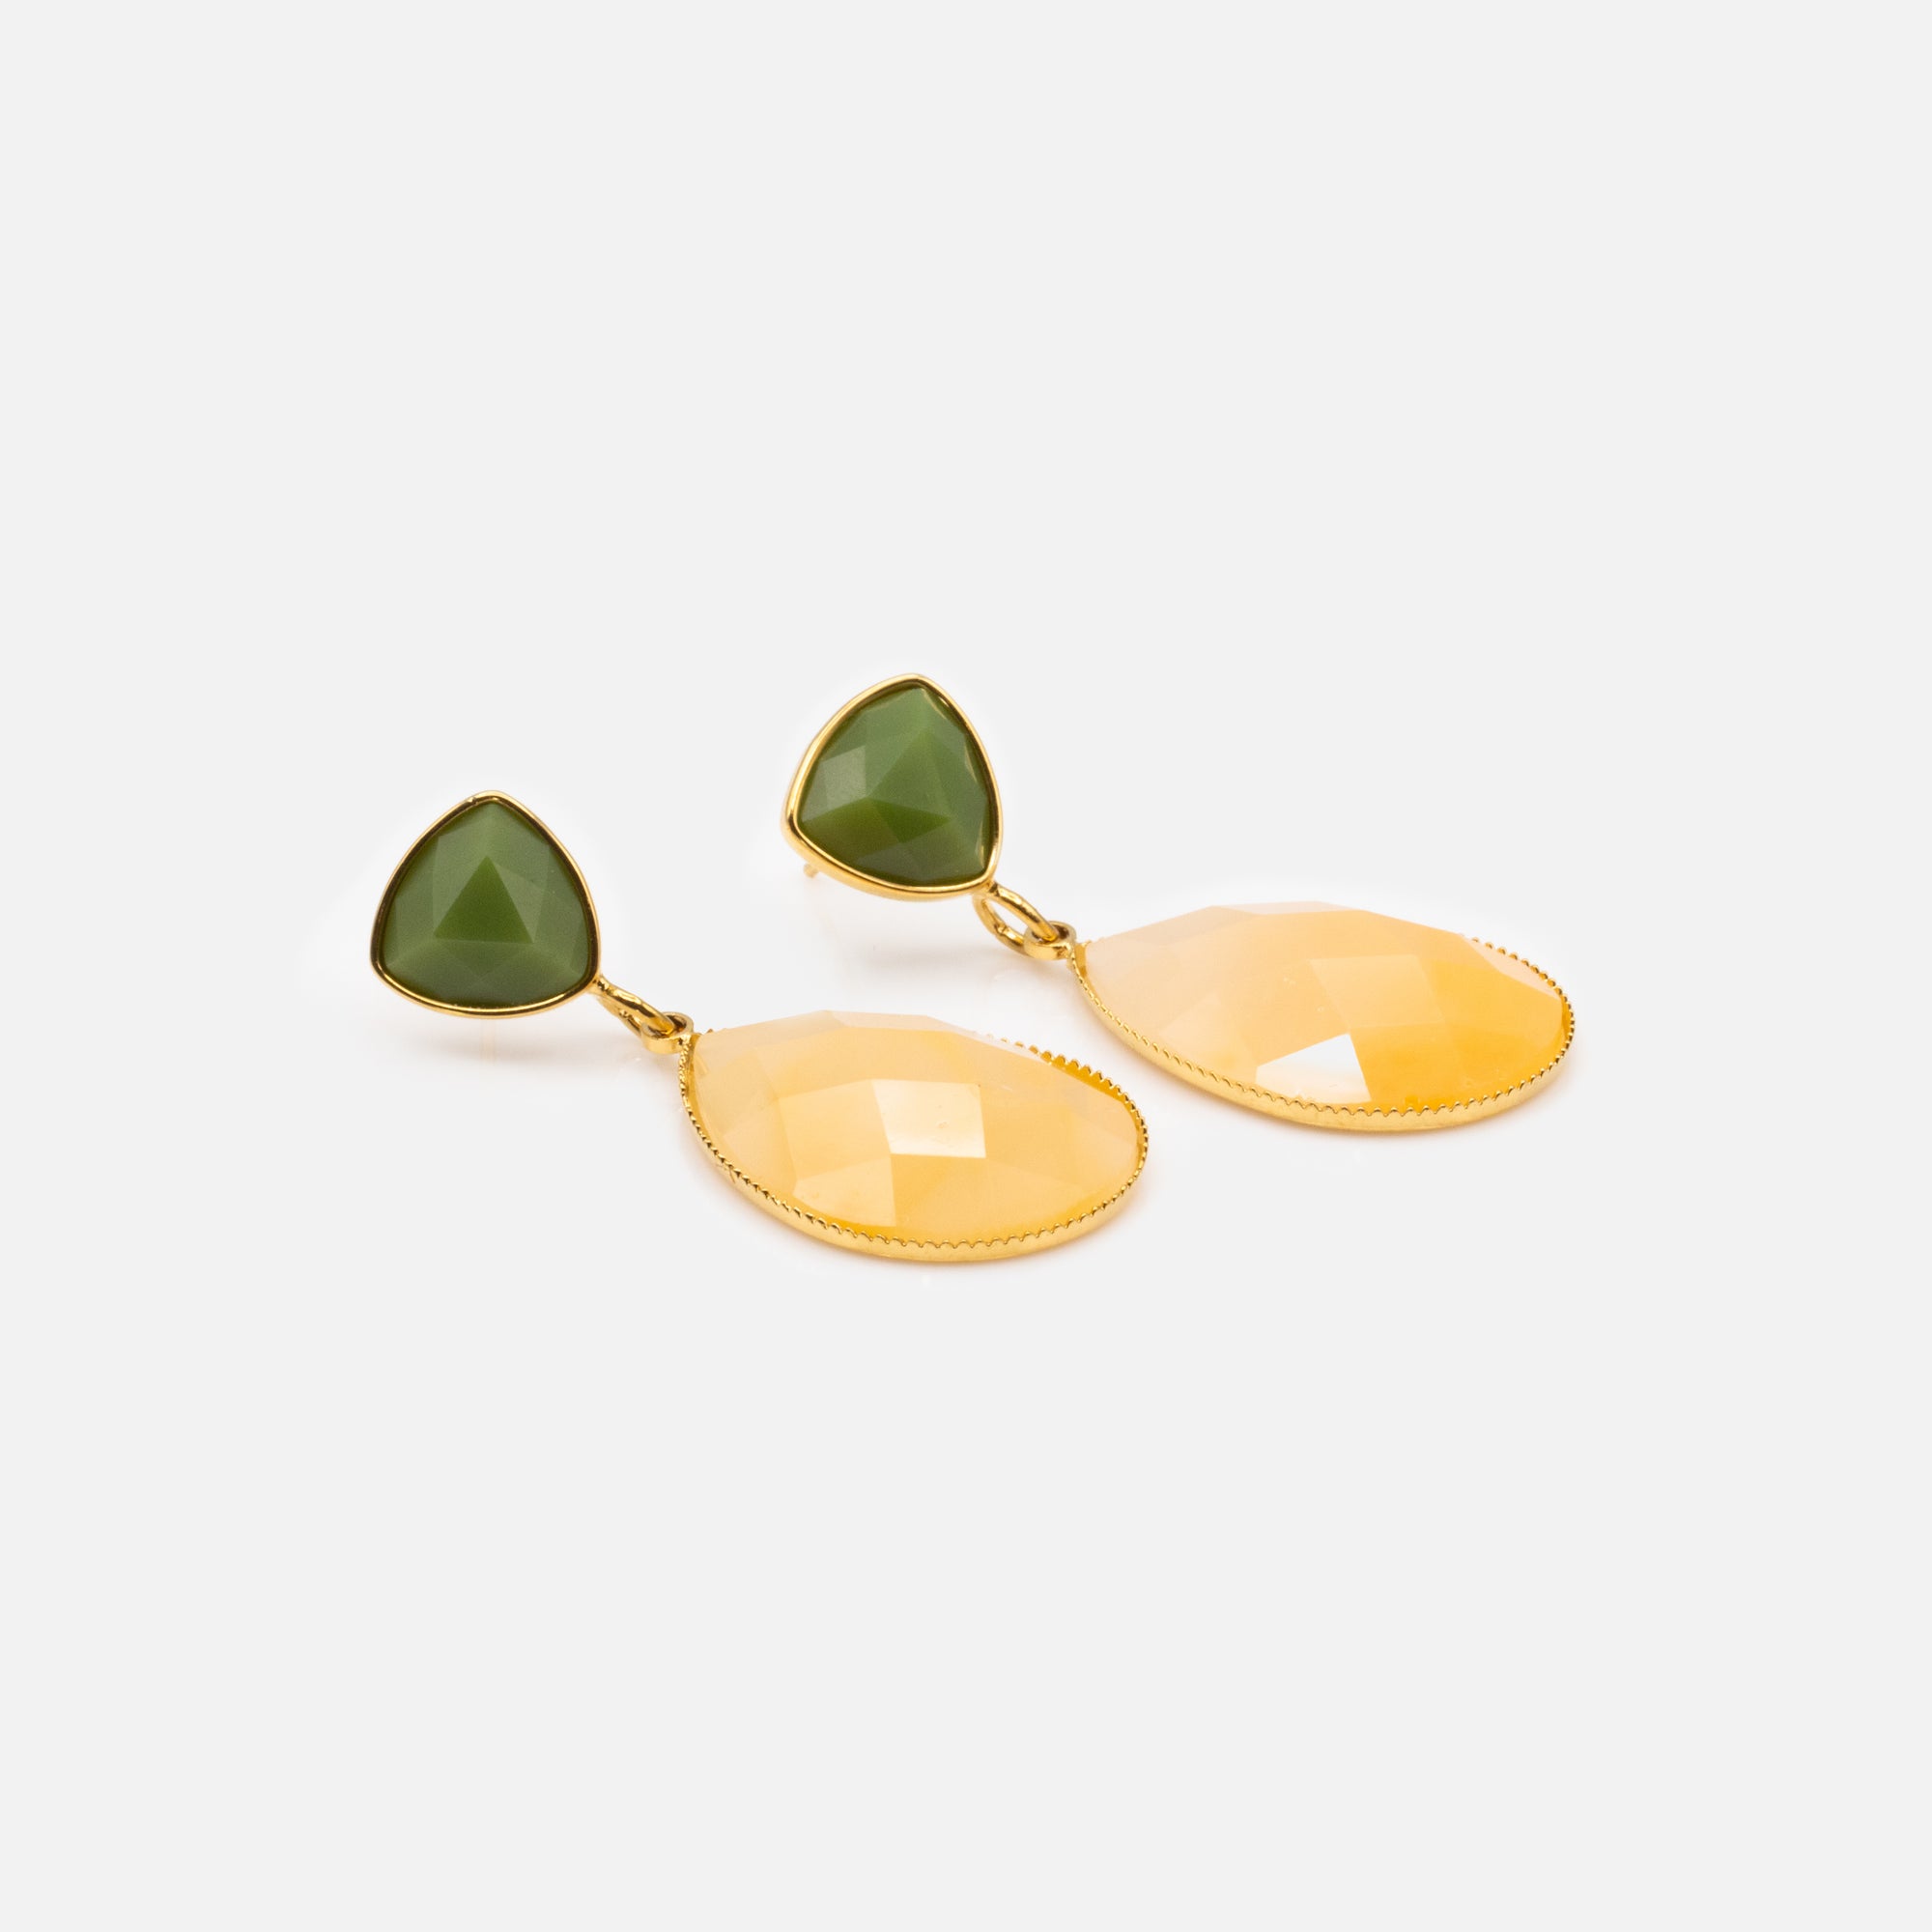 Green and cream stainless steel earrings